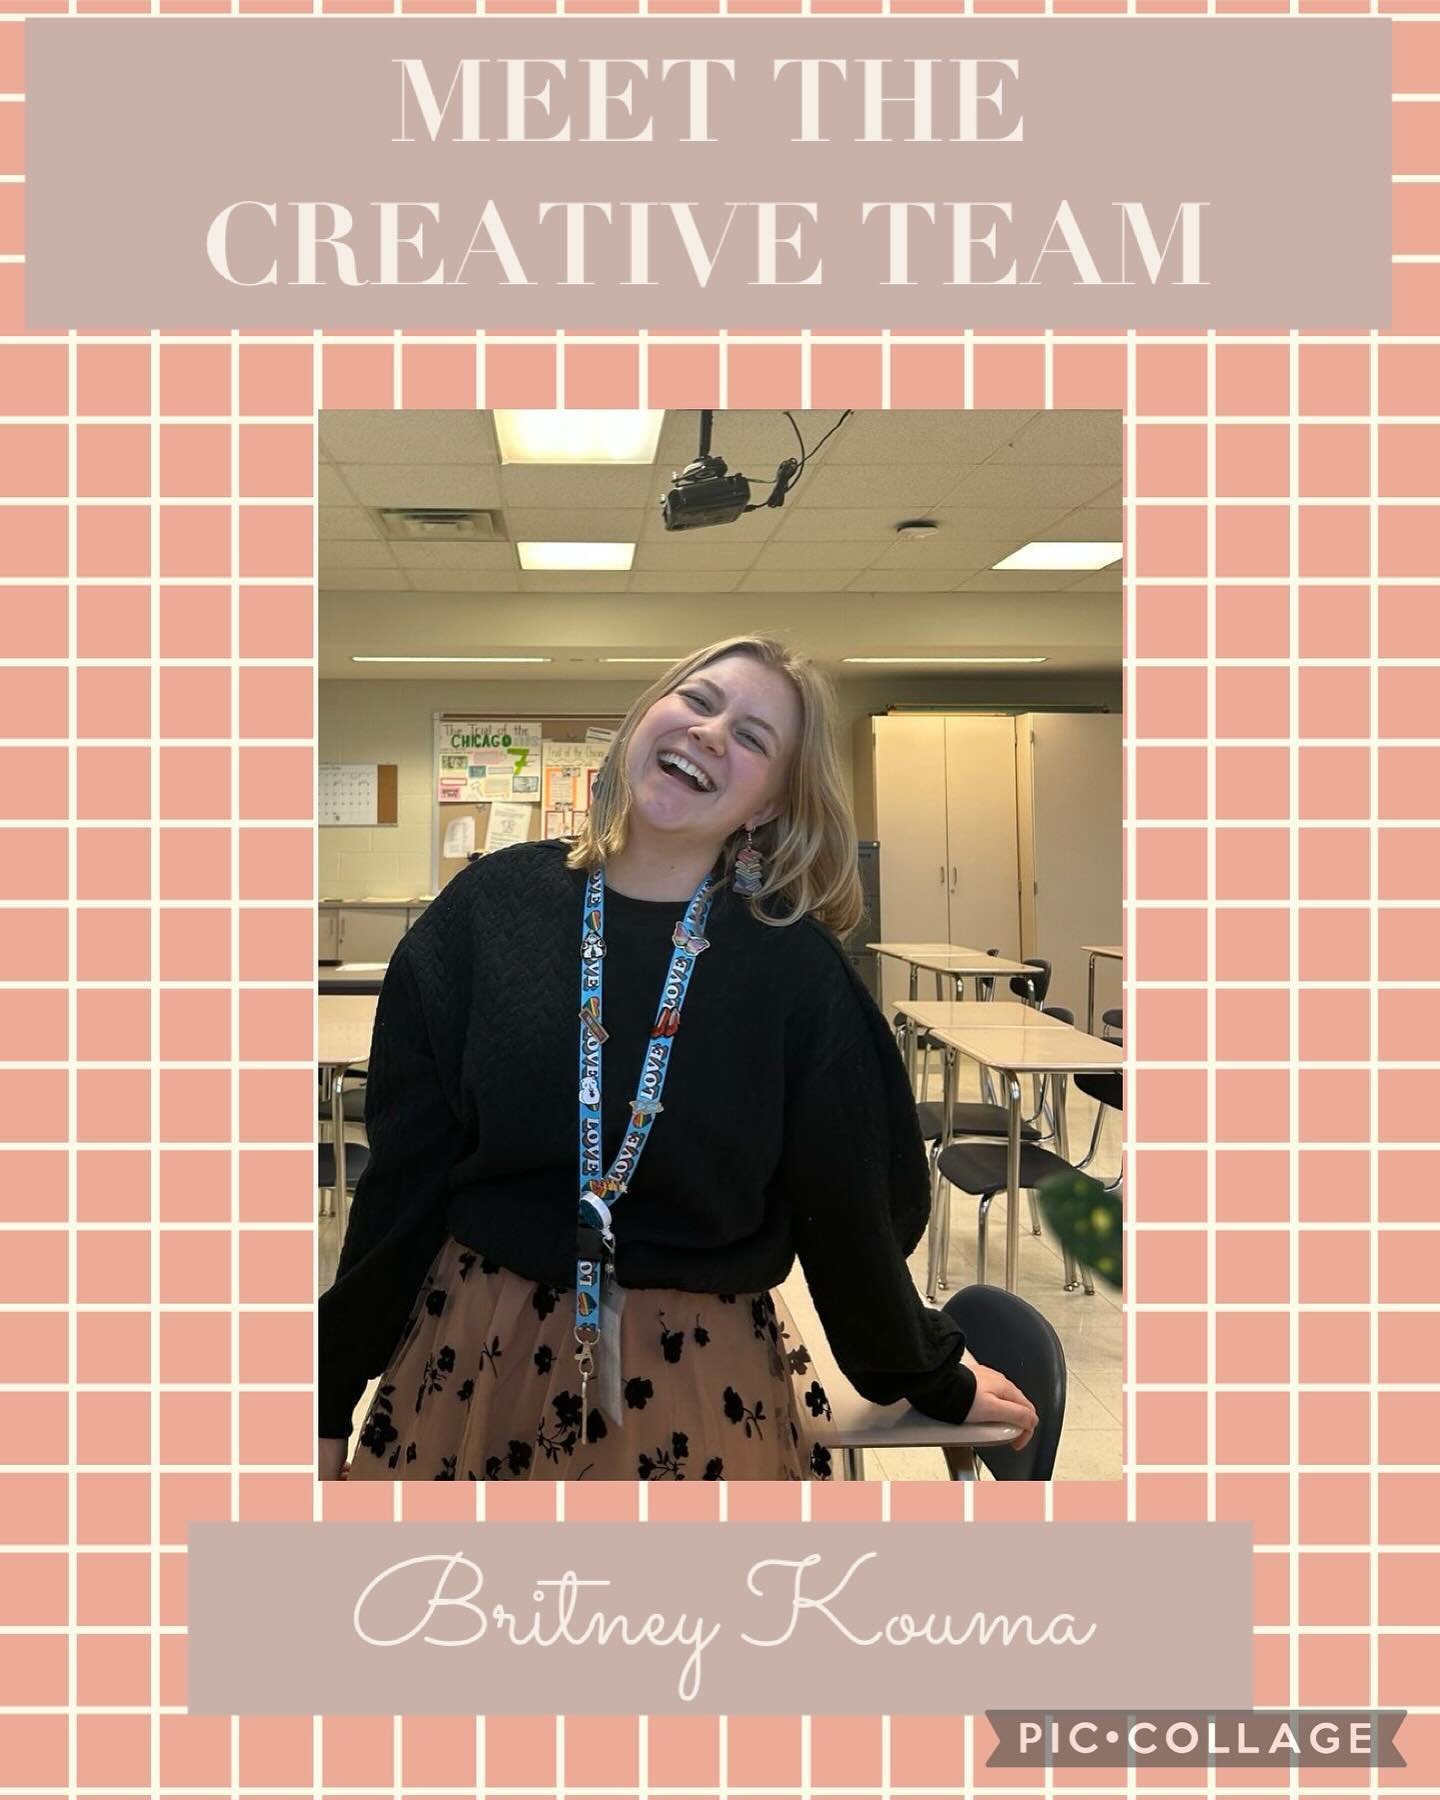 Ms. Kouma has previously stage-managed for Theatre South but will be taking over a director position this year as well. Additionally, she teaches history at BHSS! We love working with her!